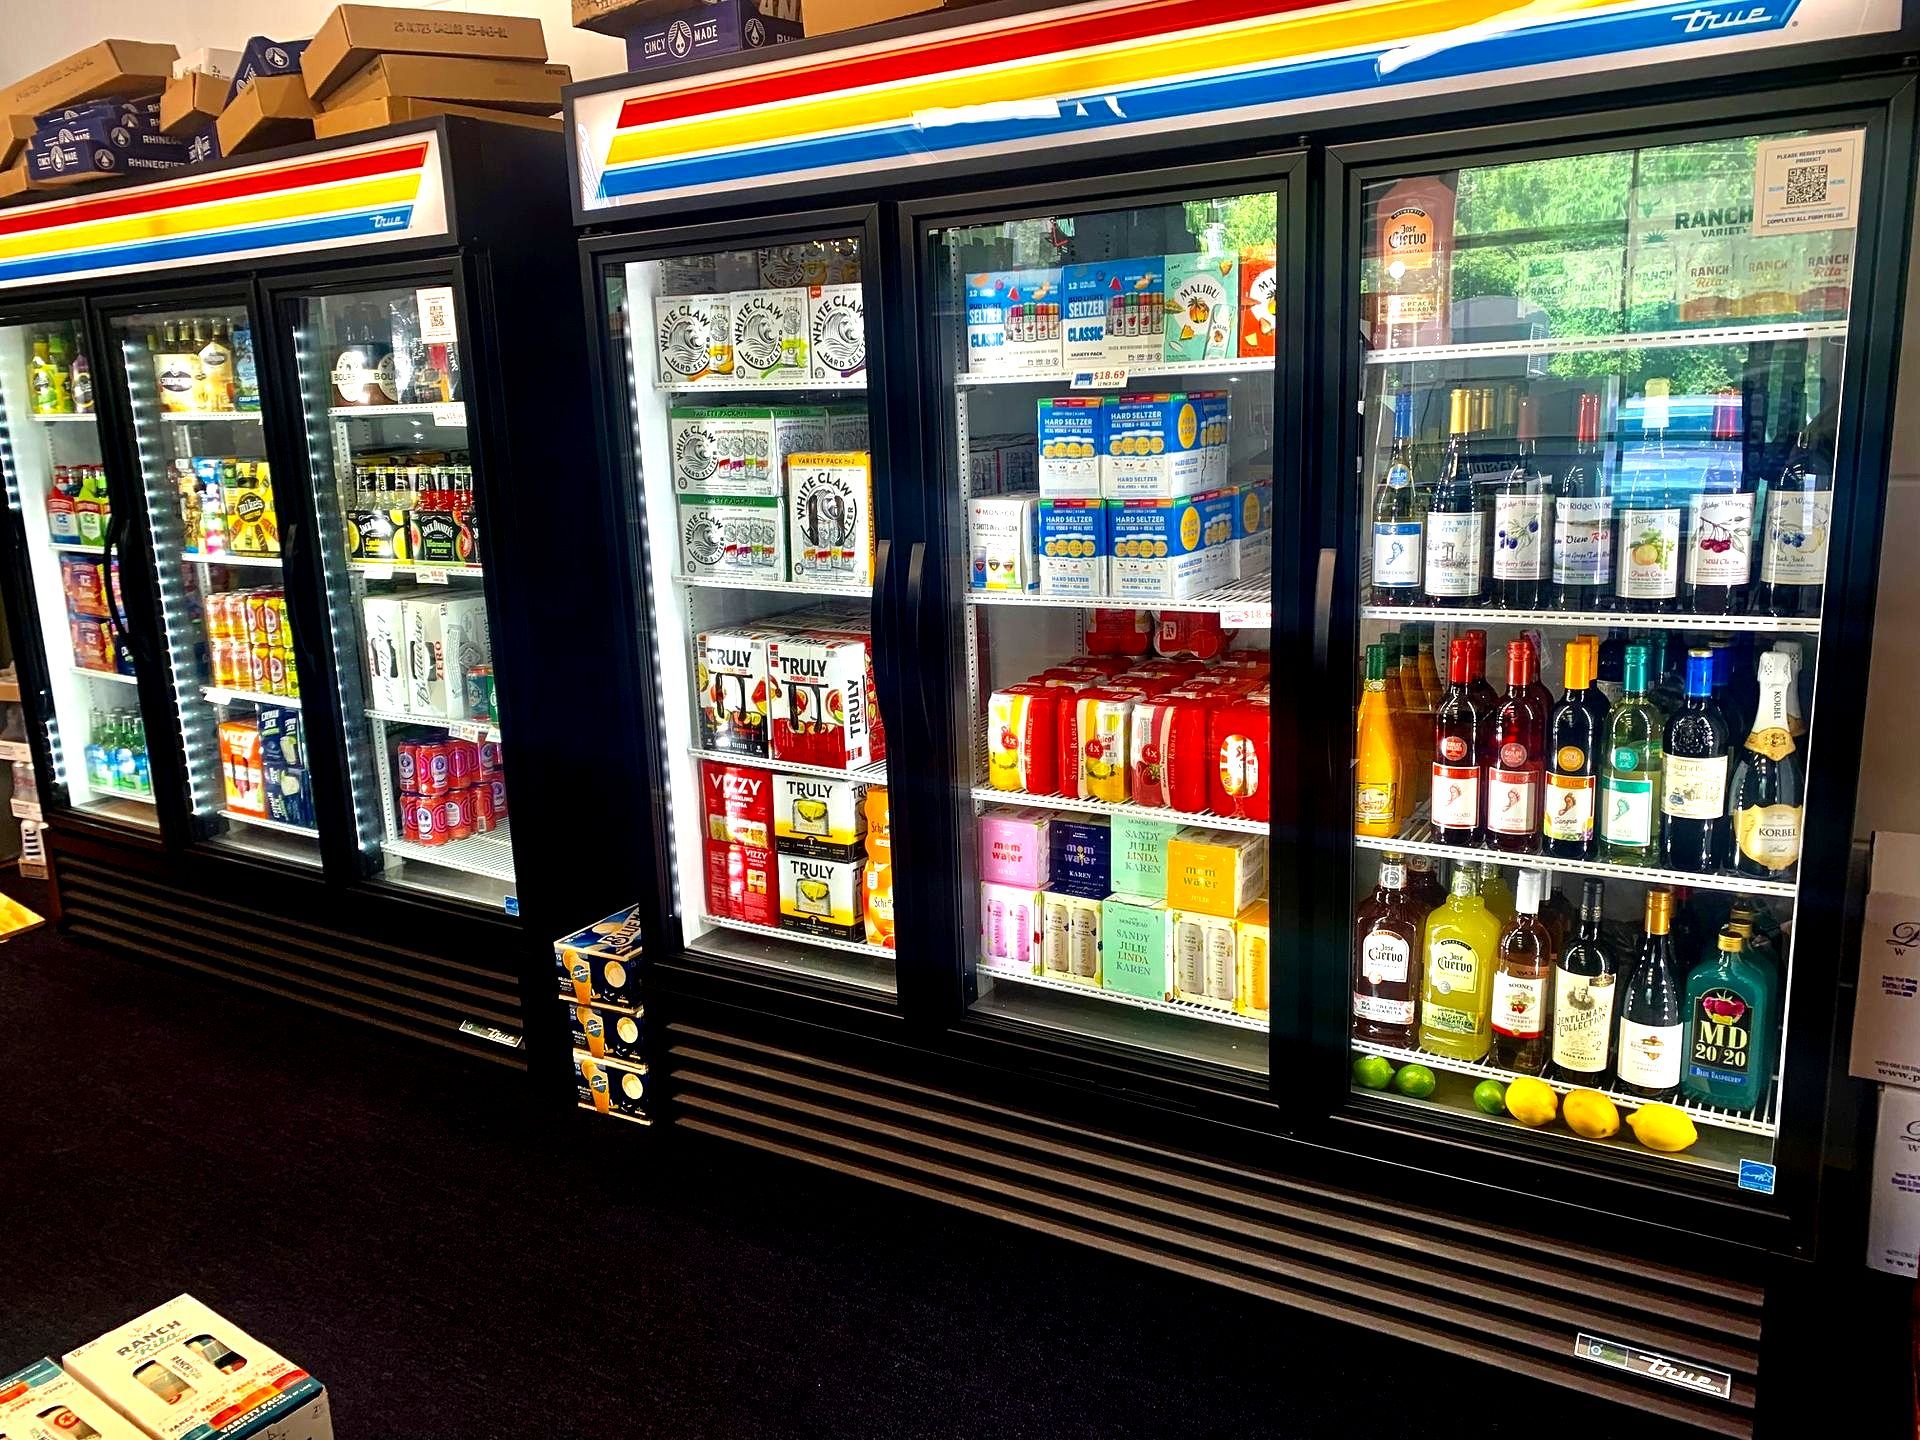 A row of refrigerators filled with bottles and cans of alcohol.